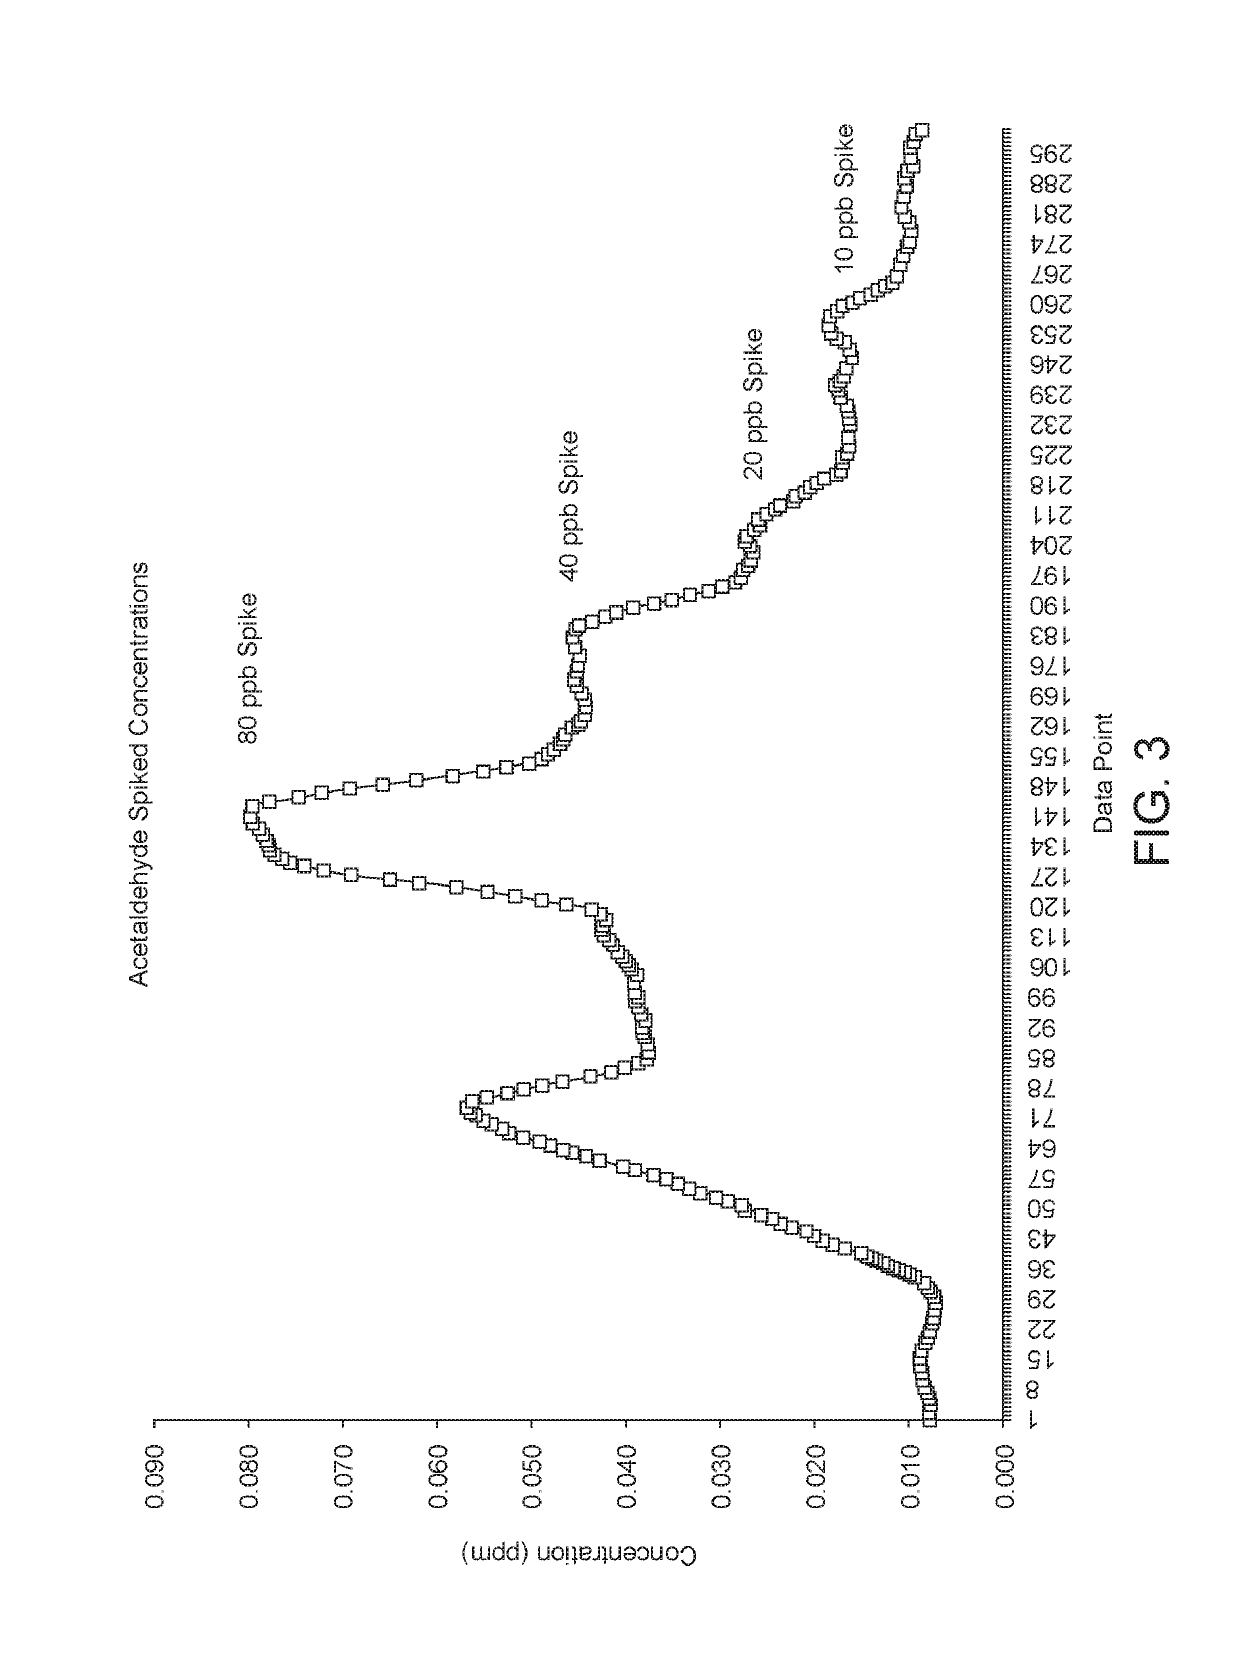 System and method for impurity detection in beverage grade gases